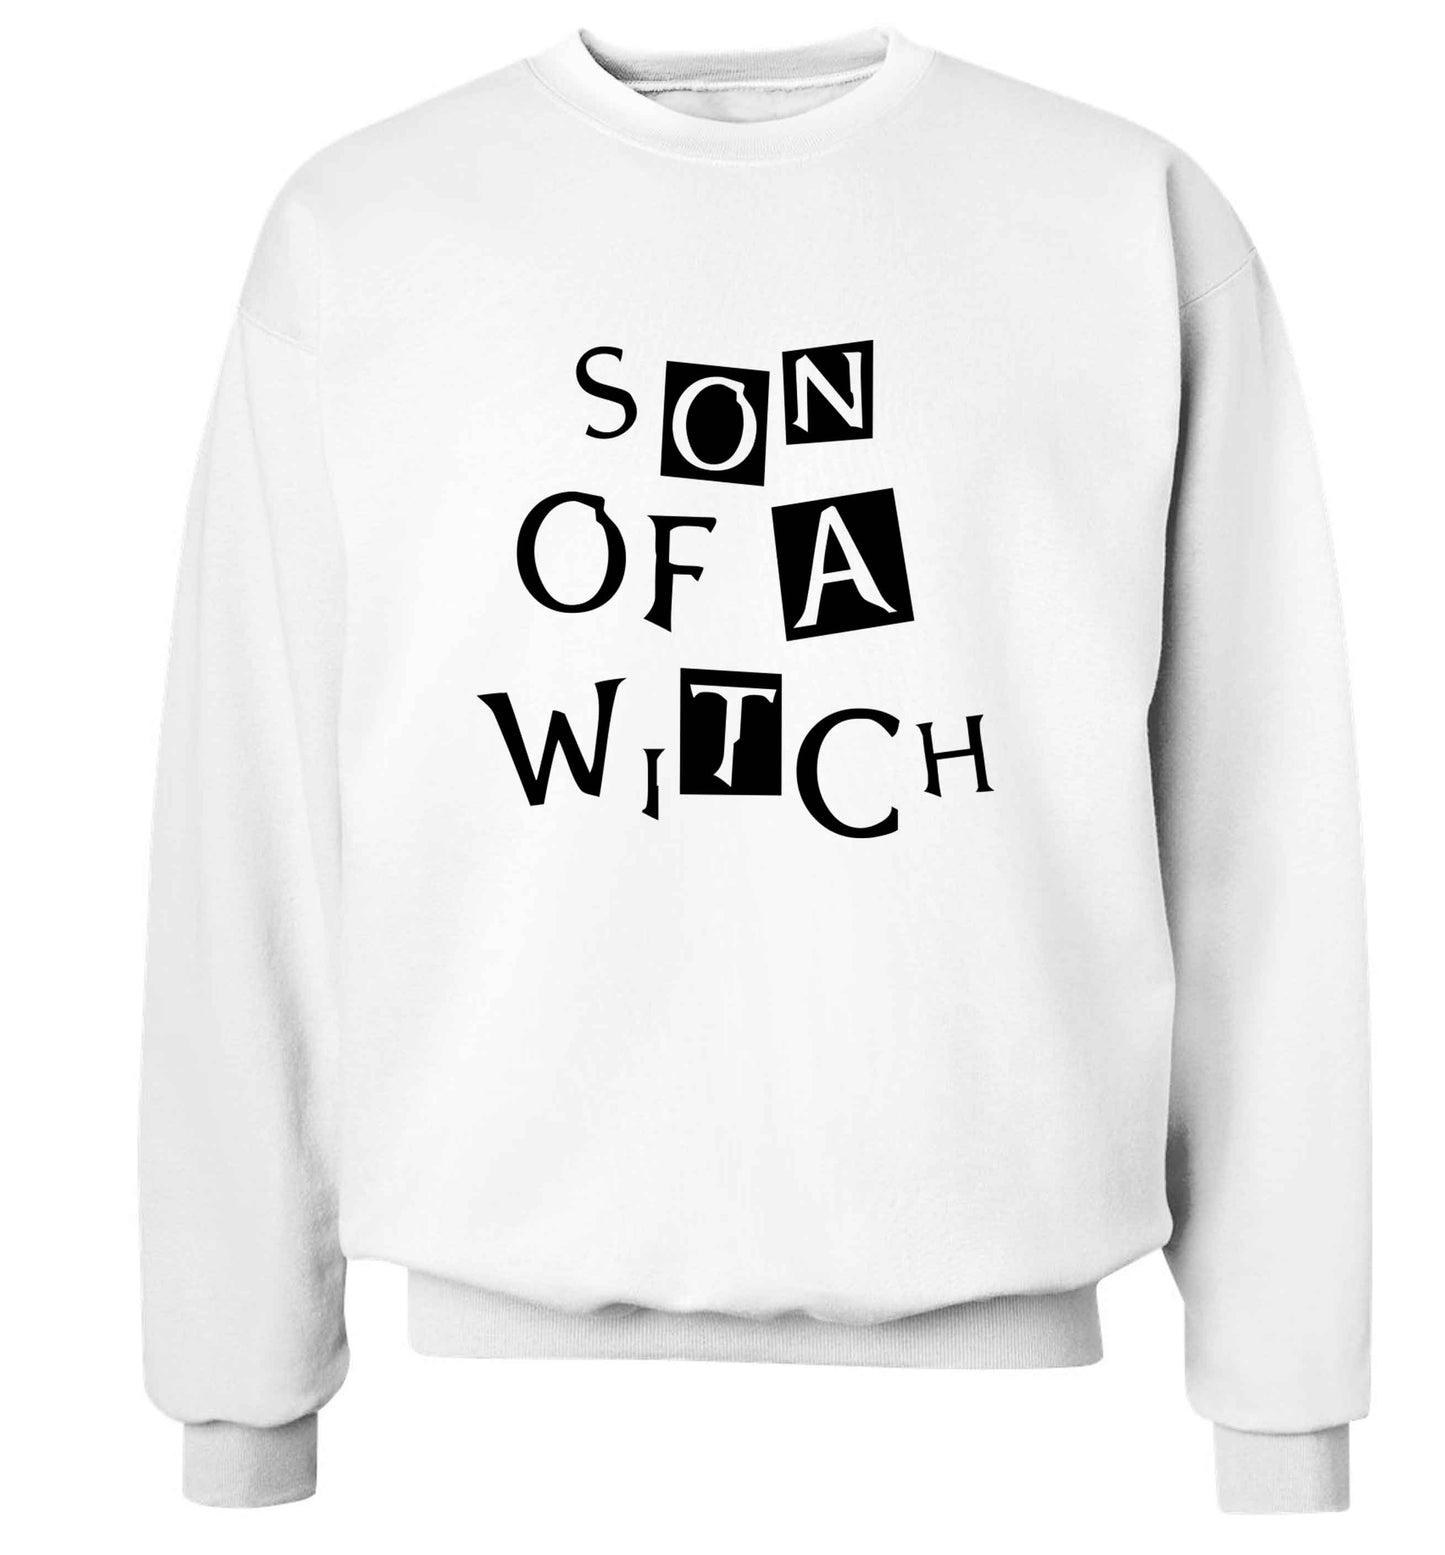 Son of a witch adult's unisex white sweater 2XL